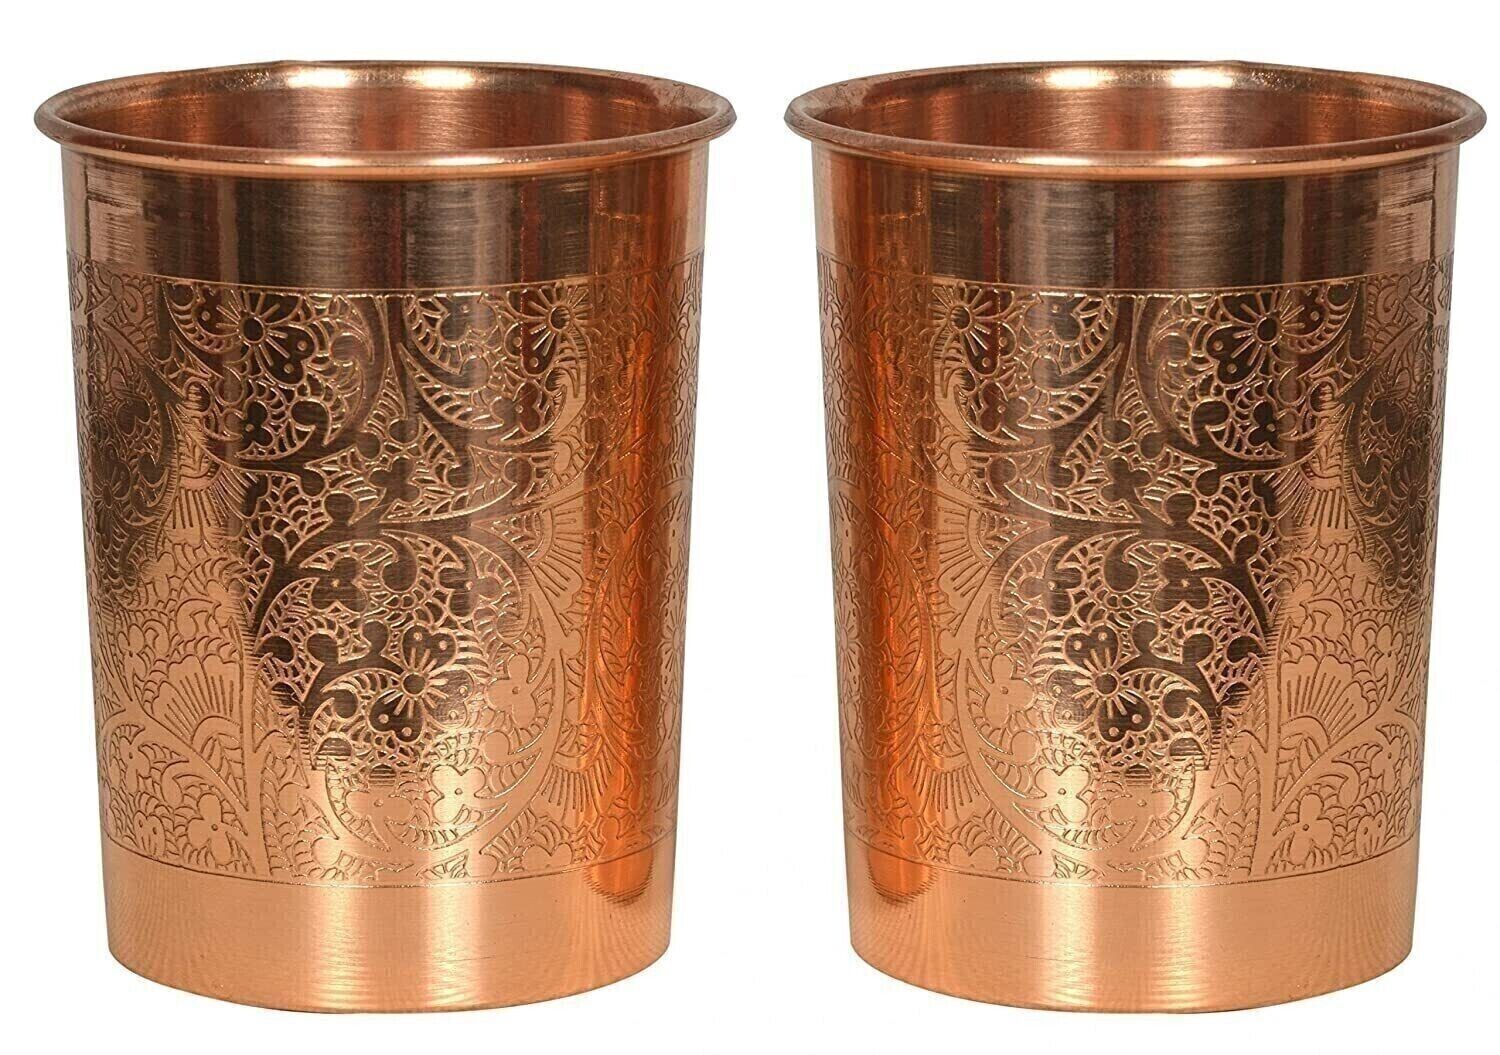 Pure Copper Handmade Water Drinking Glass Tumbler For Health Benefits Set Of 2